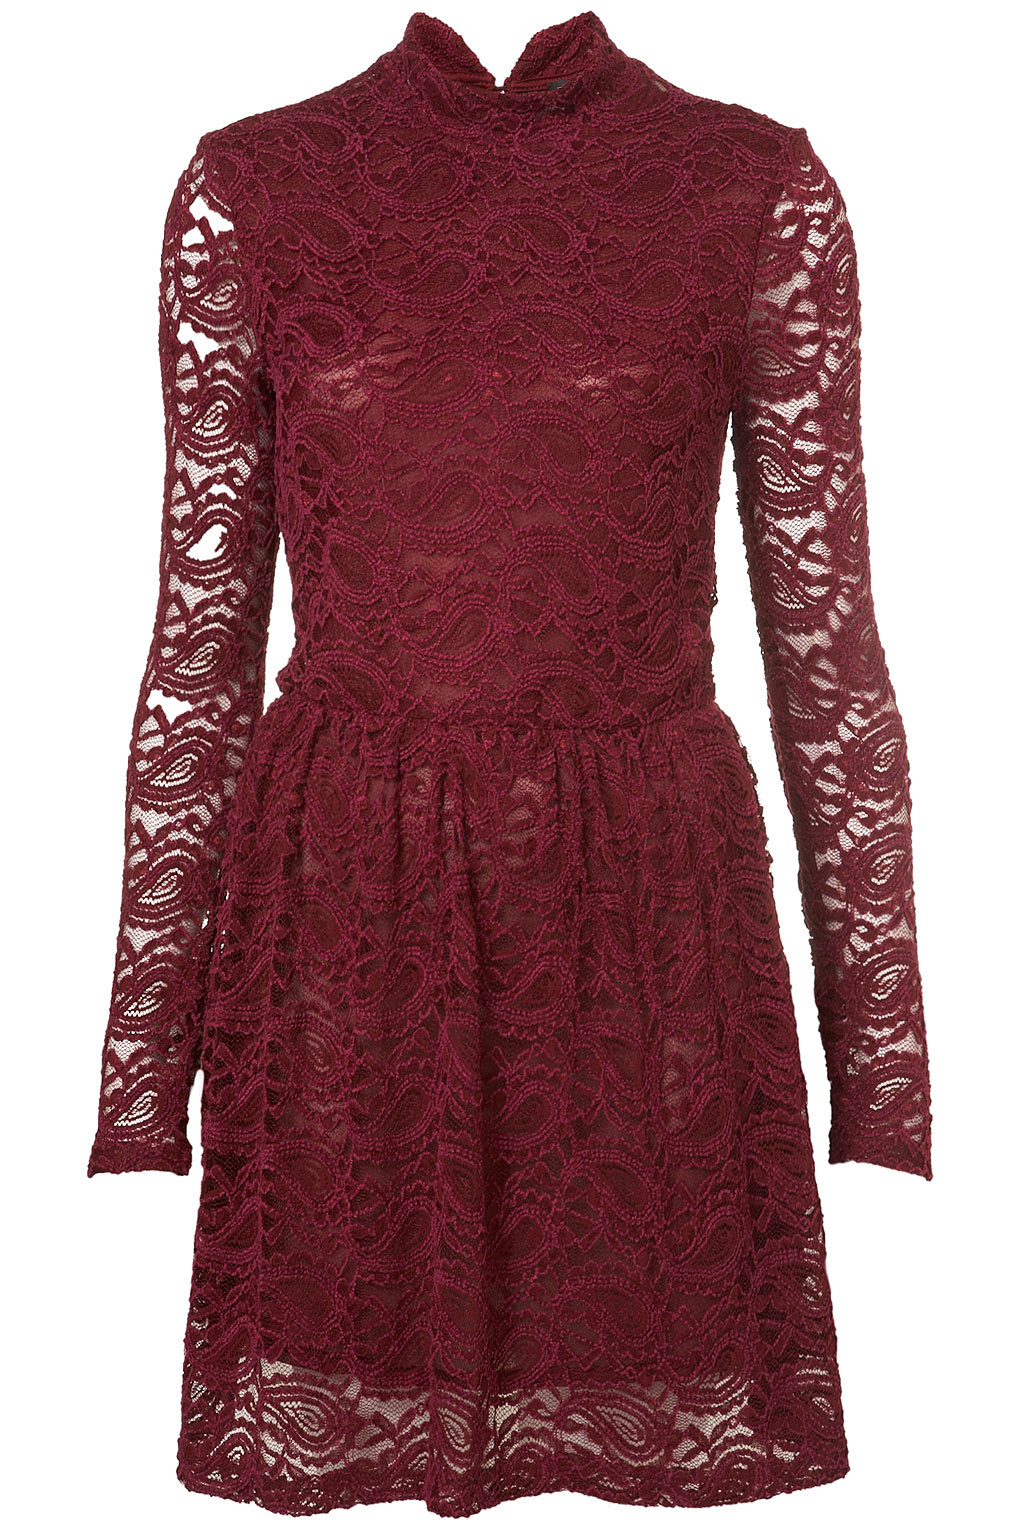 Lyst - Topshop Paisley Lace Roll Neck Tunic in Purple